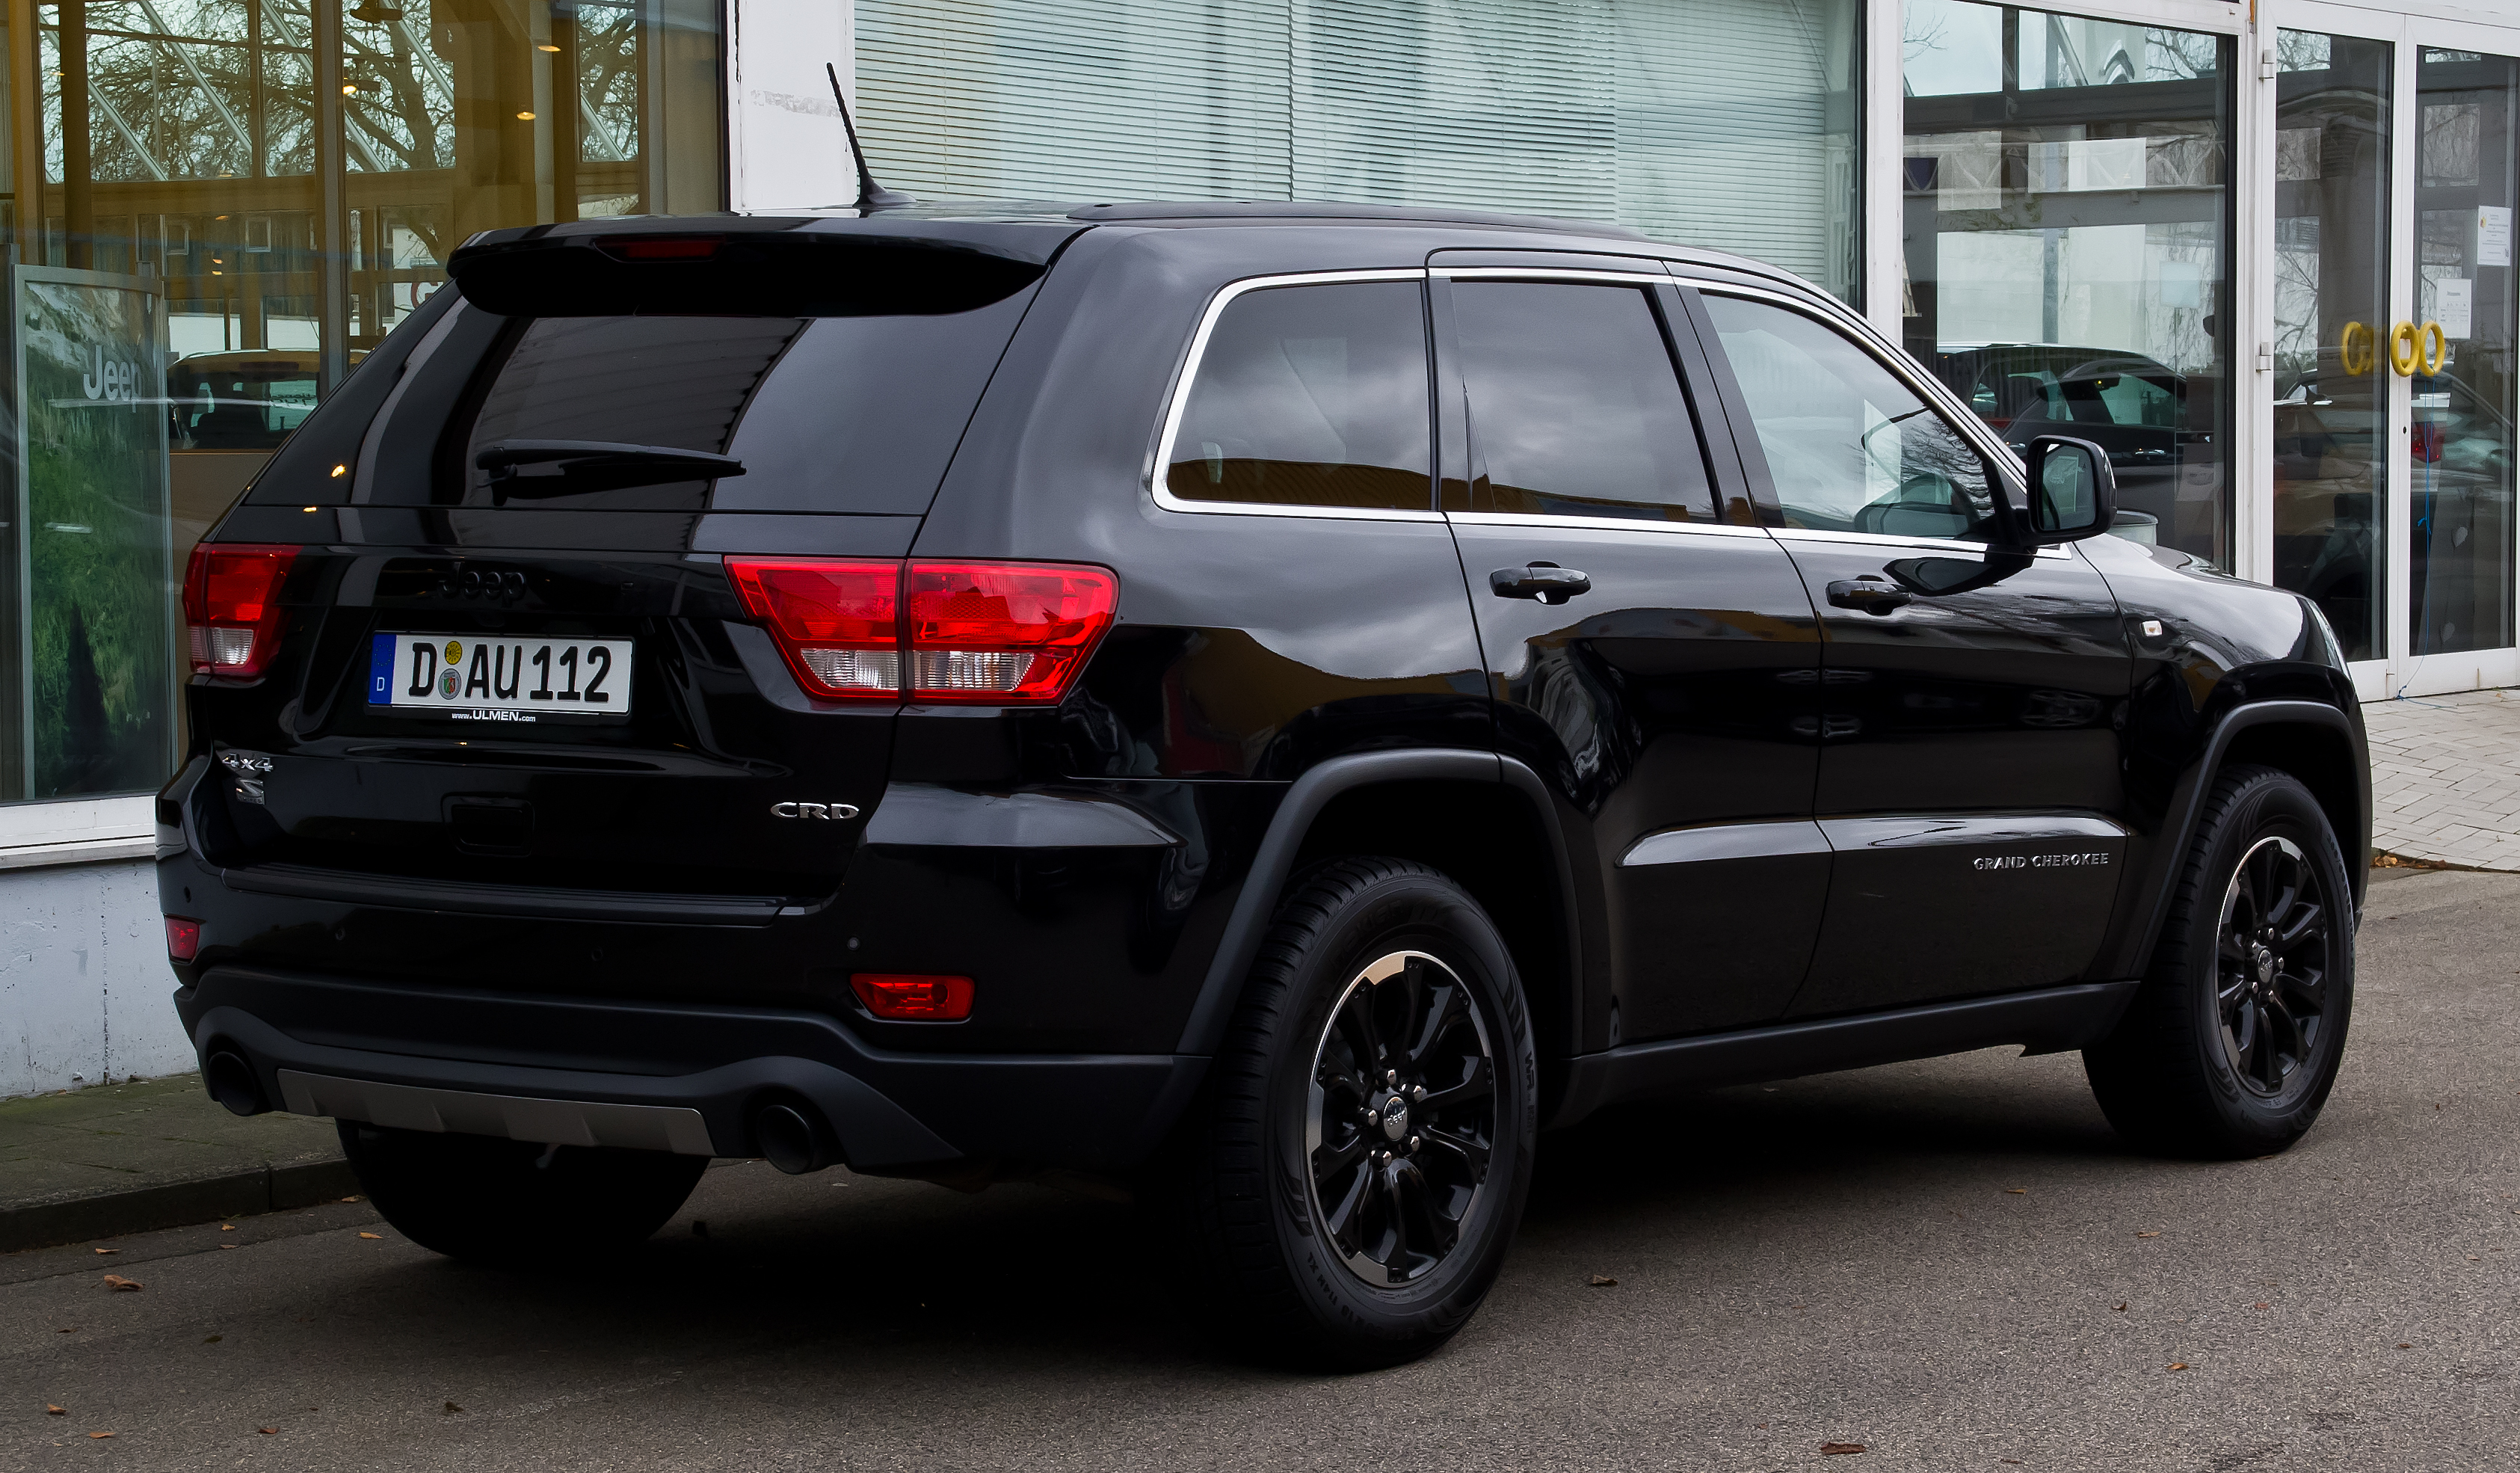 Jeep Grand Cherokee SLimited 3.0 CRD image 4